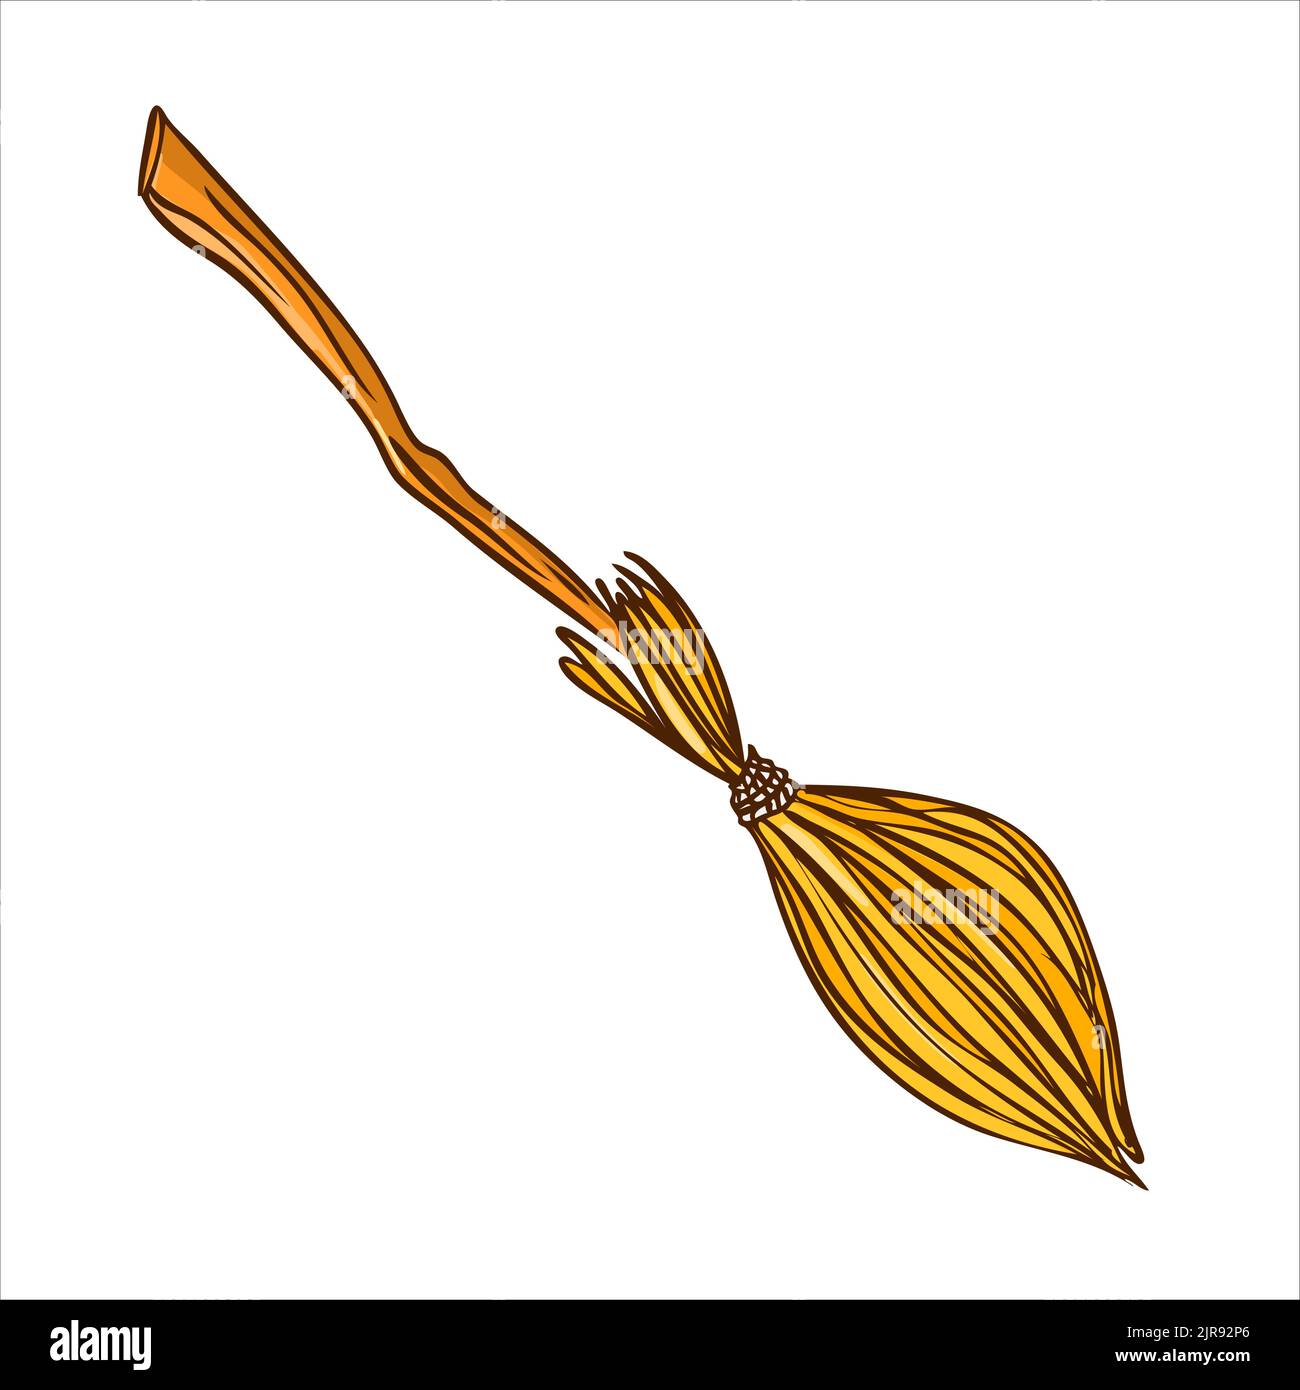 Old witch's broom on long wooden handle. Vector illustration in hand drawn style Stock Vector